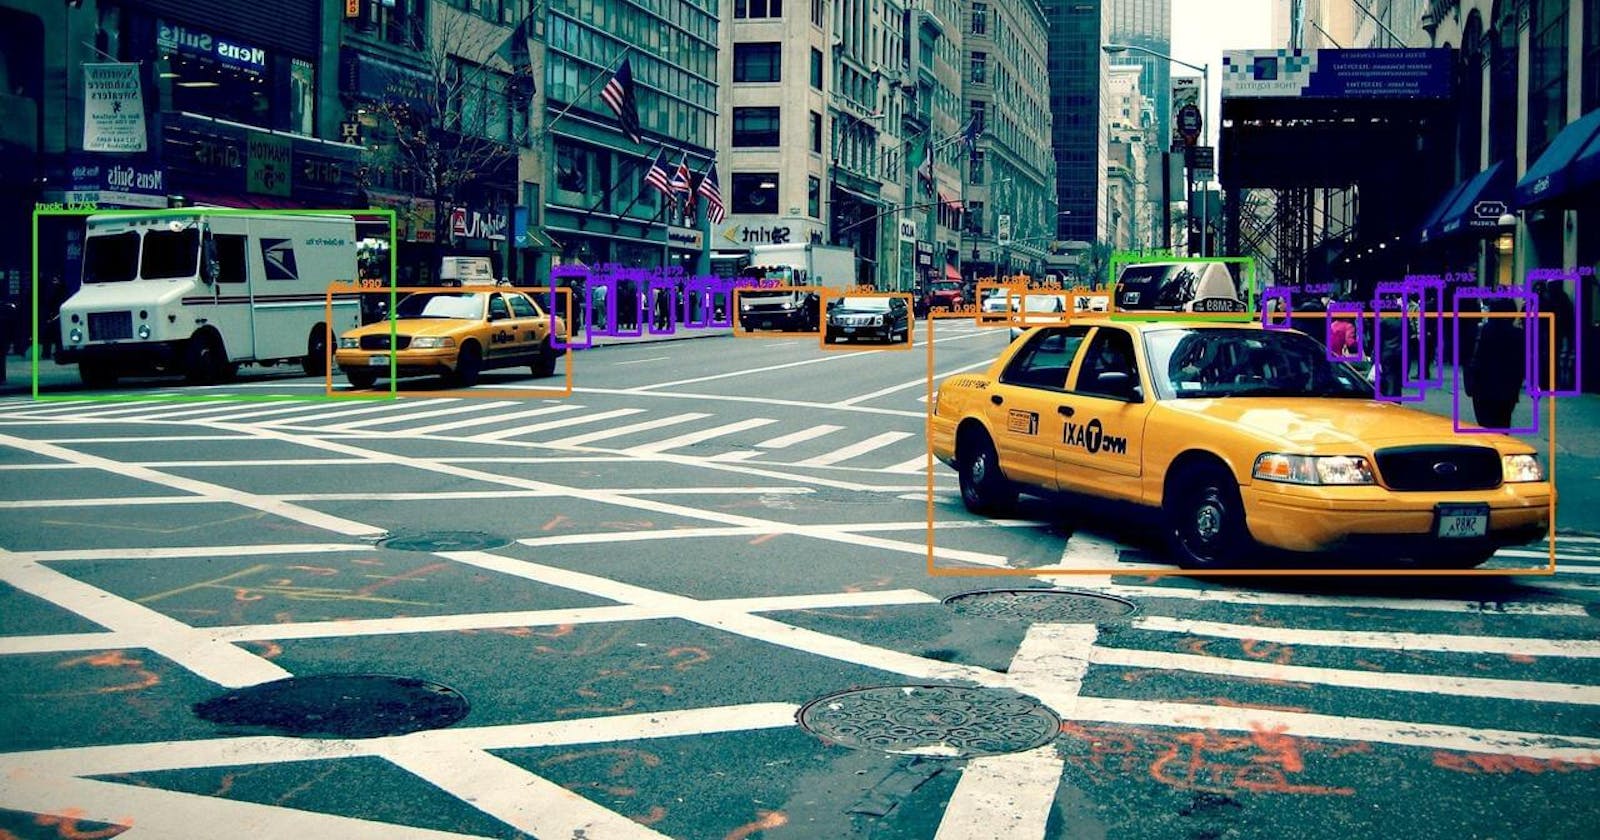 Introduction to Object Detection: Part 1